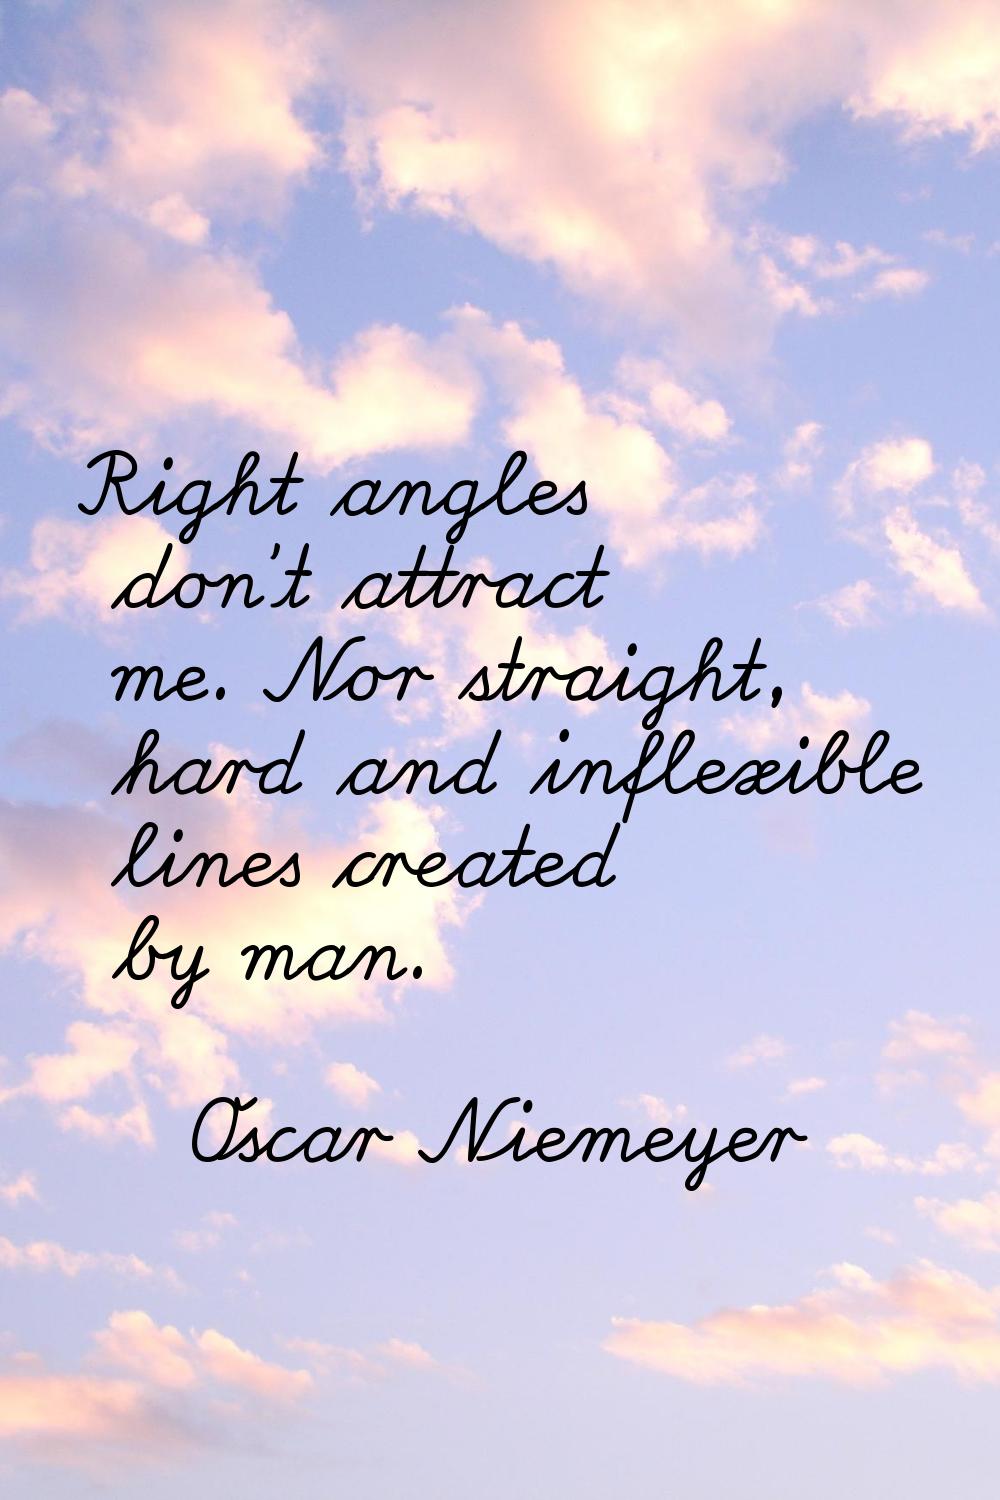 Right angles don't attract me. Nor straight, hard and inflexible lines created by man.